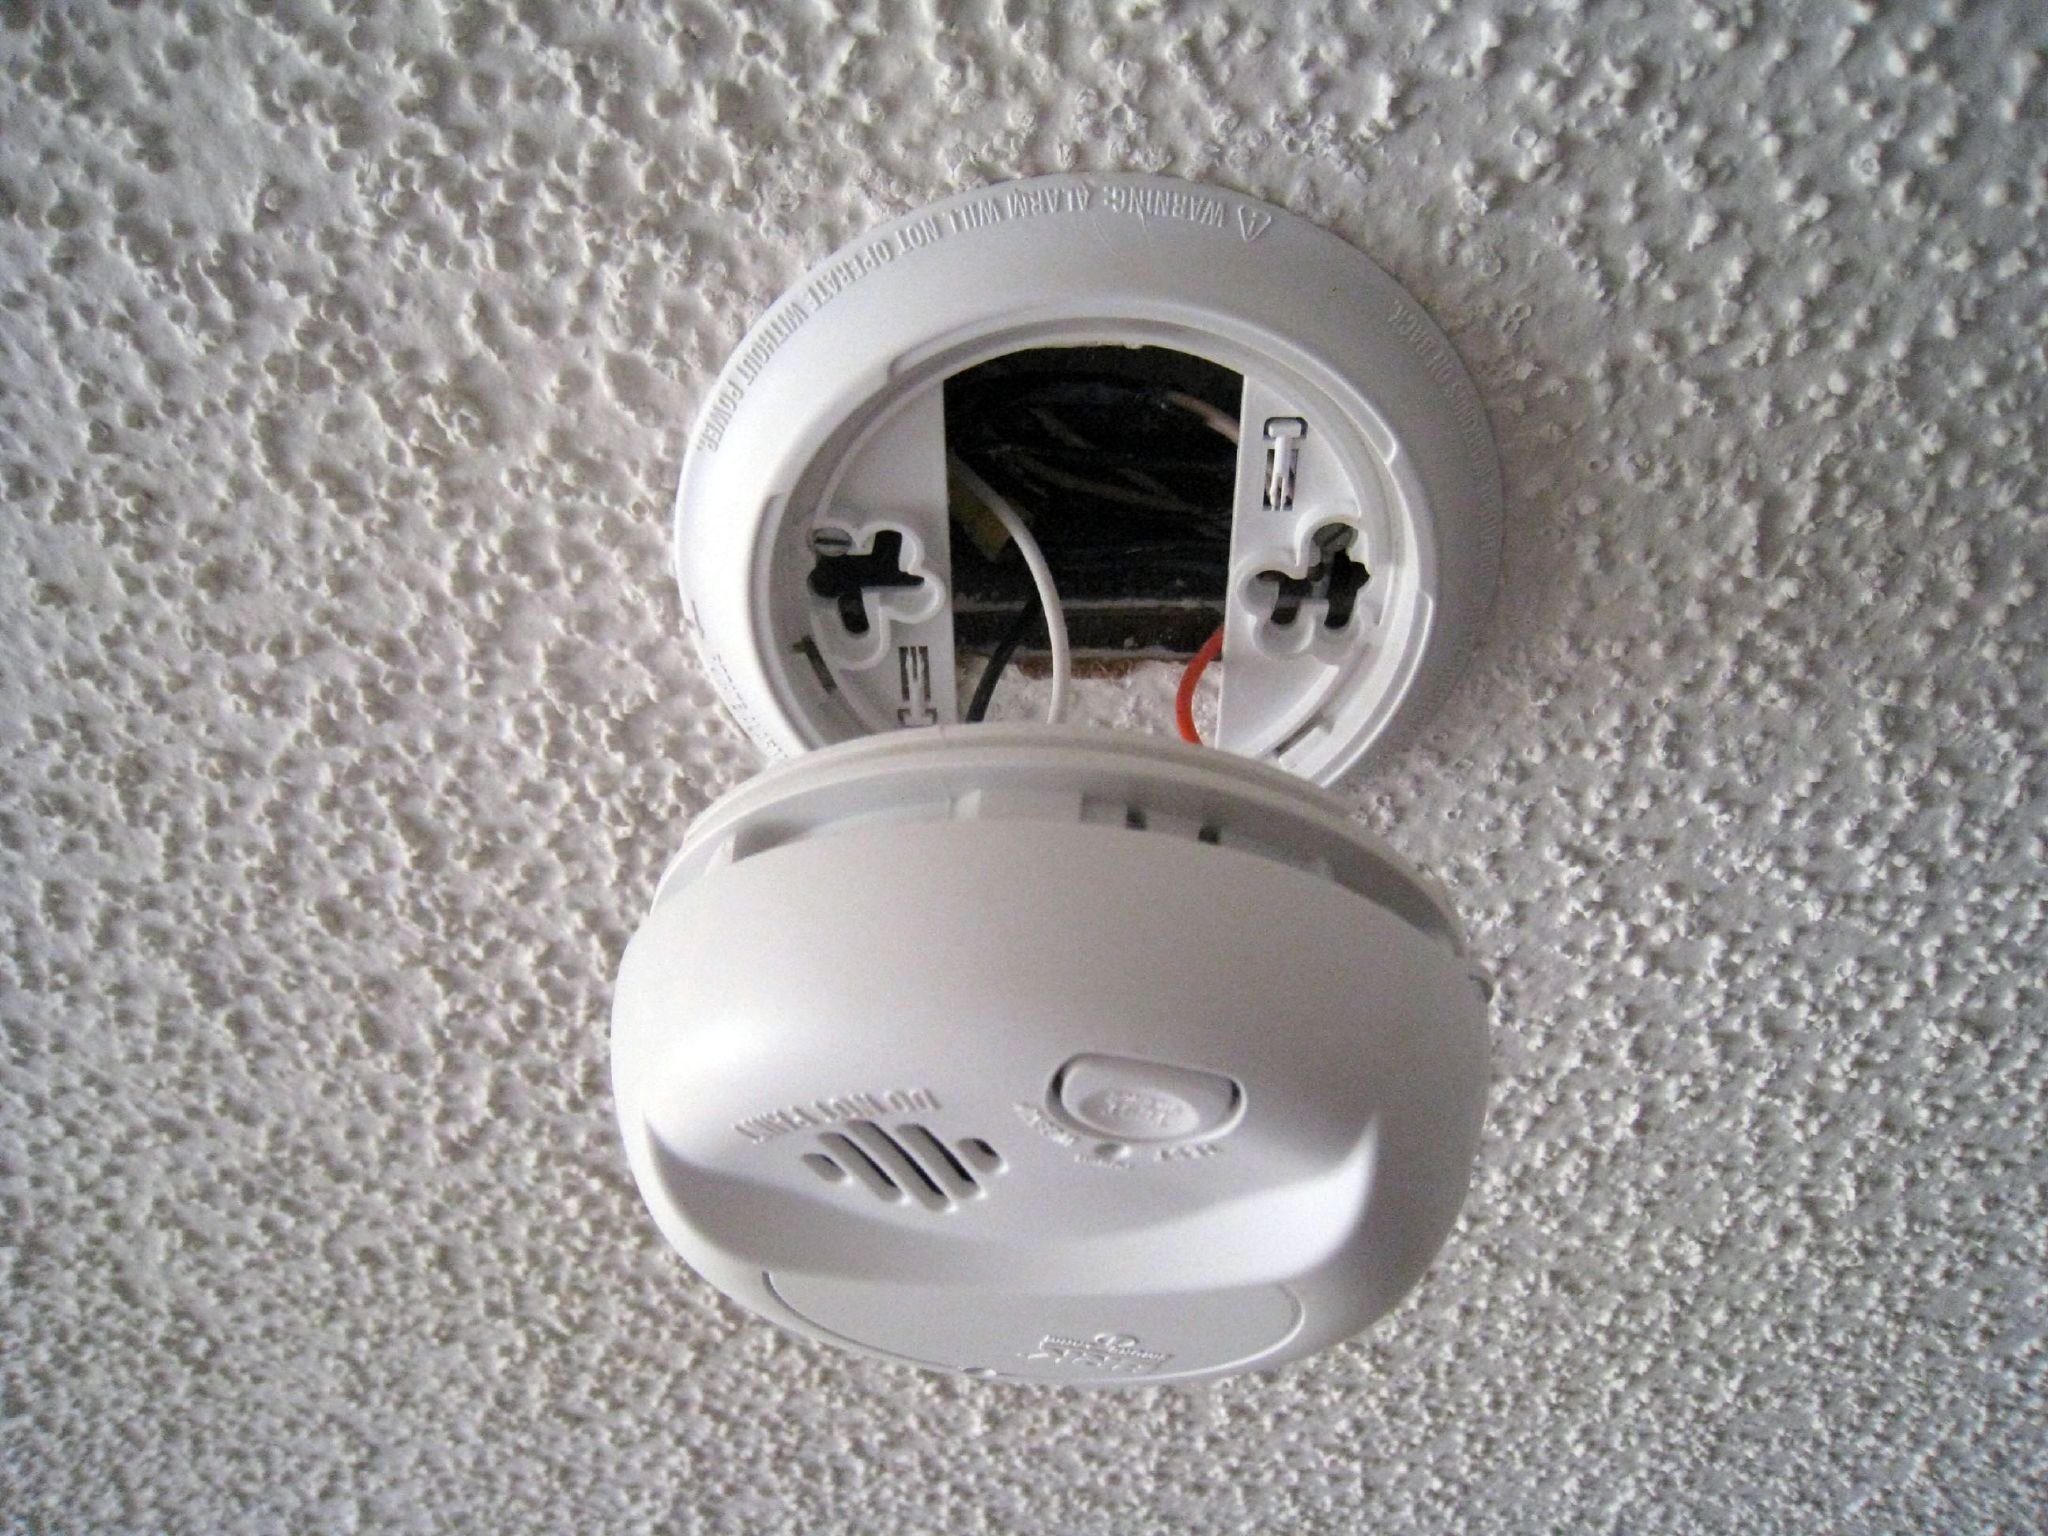 Do Fire Stations Replace Smoke Alarms